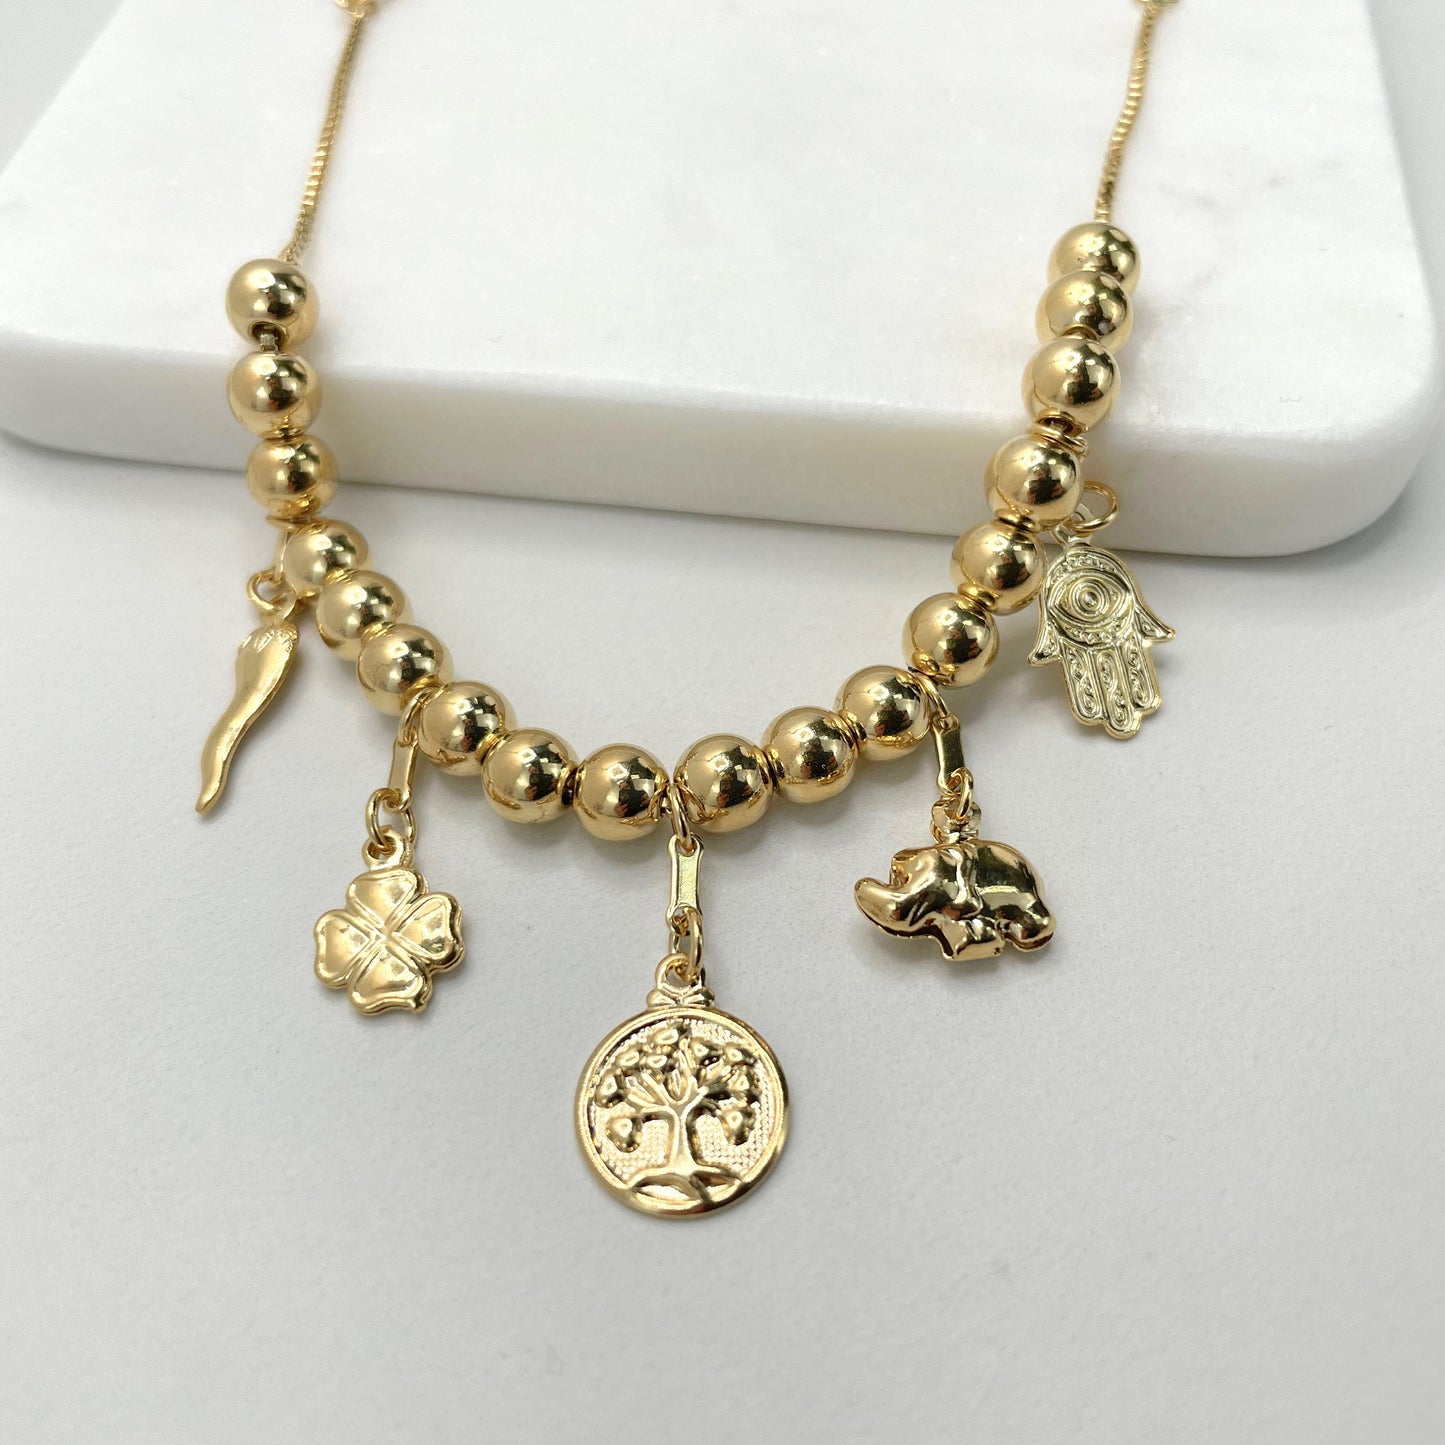 18k Gold Filled Box Chain Beads Hamsa Hand, Elephant, Tree Life, Clover, Chili Charms Lucky & Protection Bracelet Wholesale Jewelry Supplies